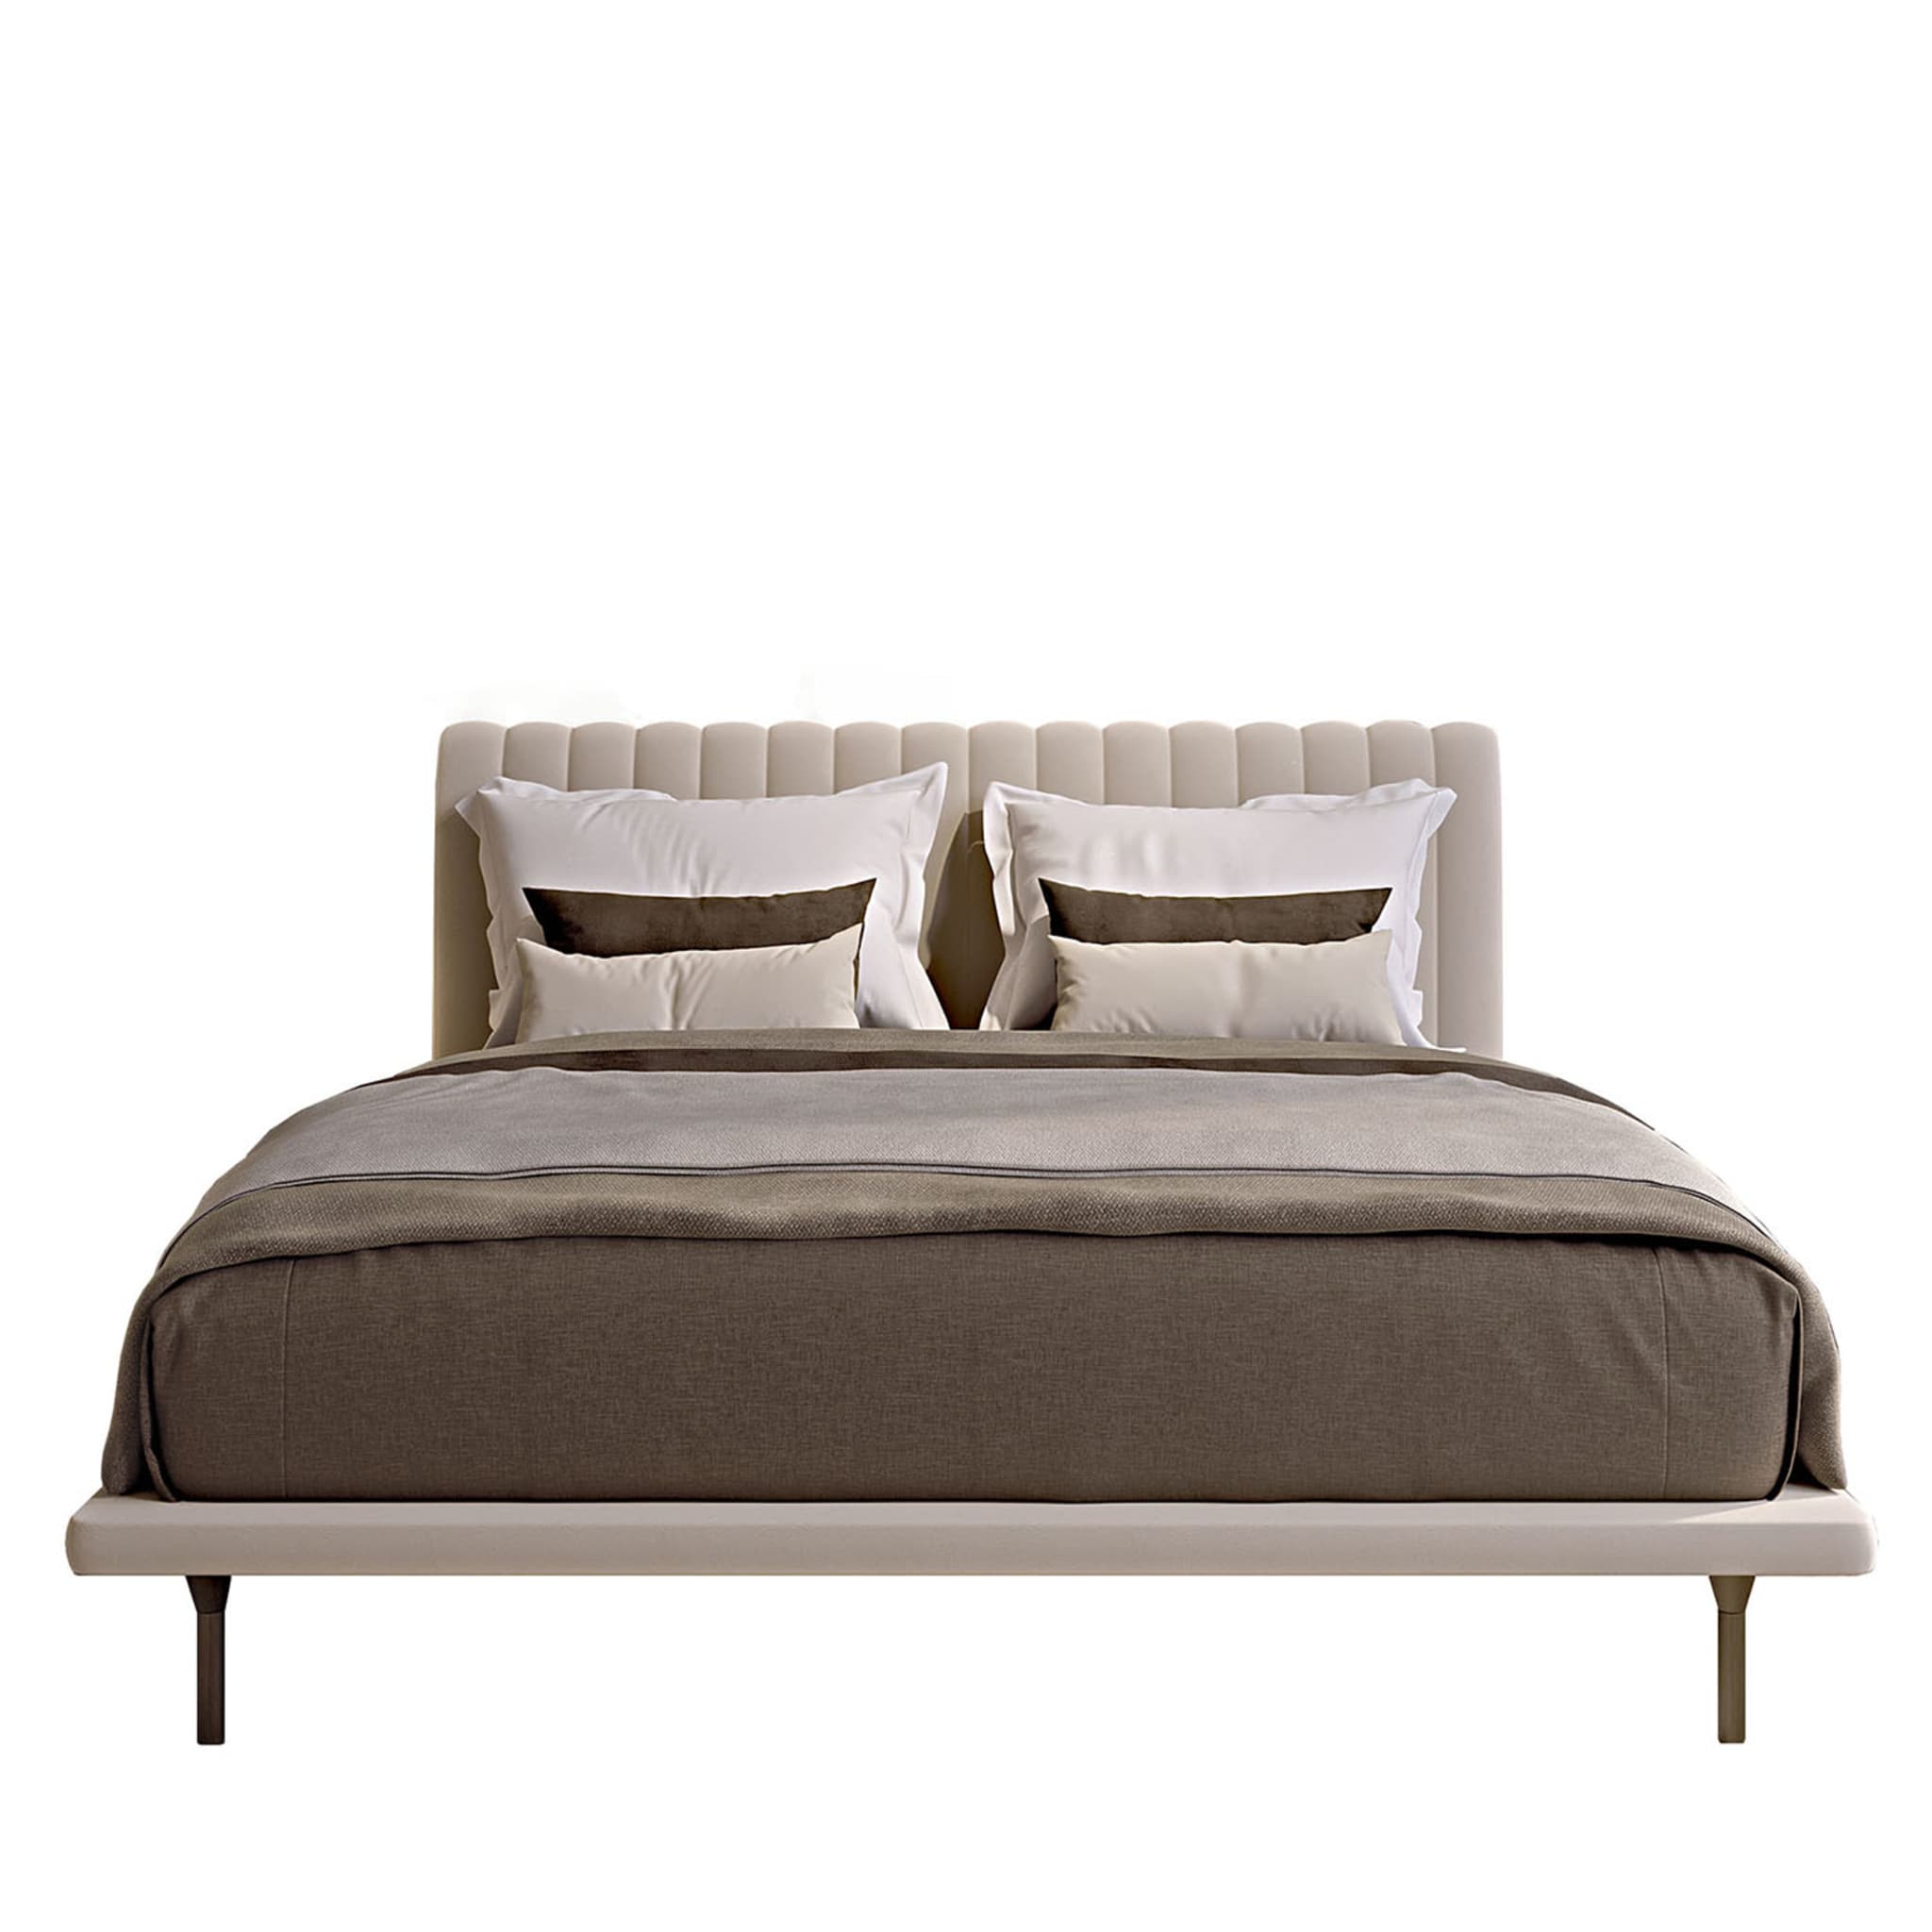 Opale Small Channeled Beige Double Bed - Main view